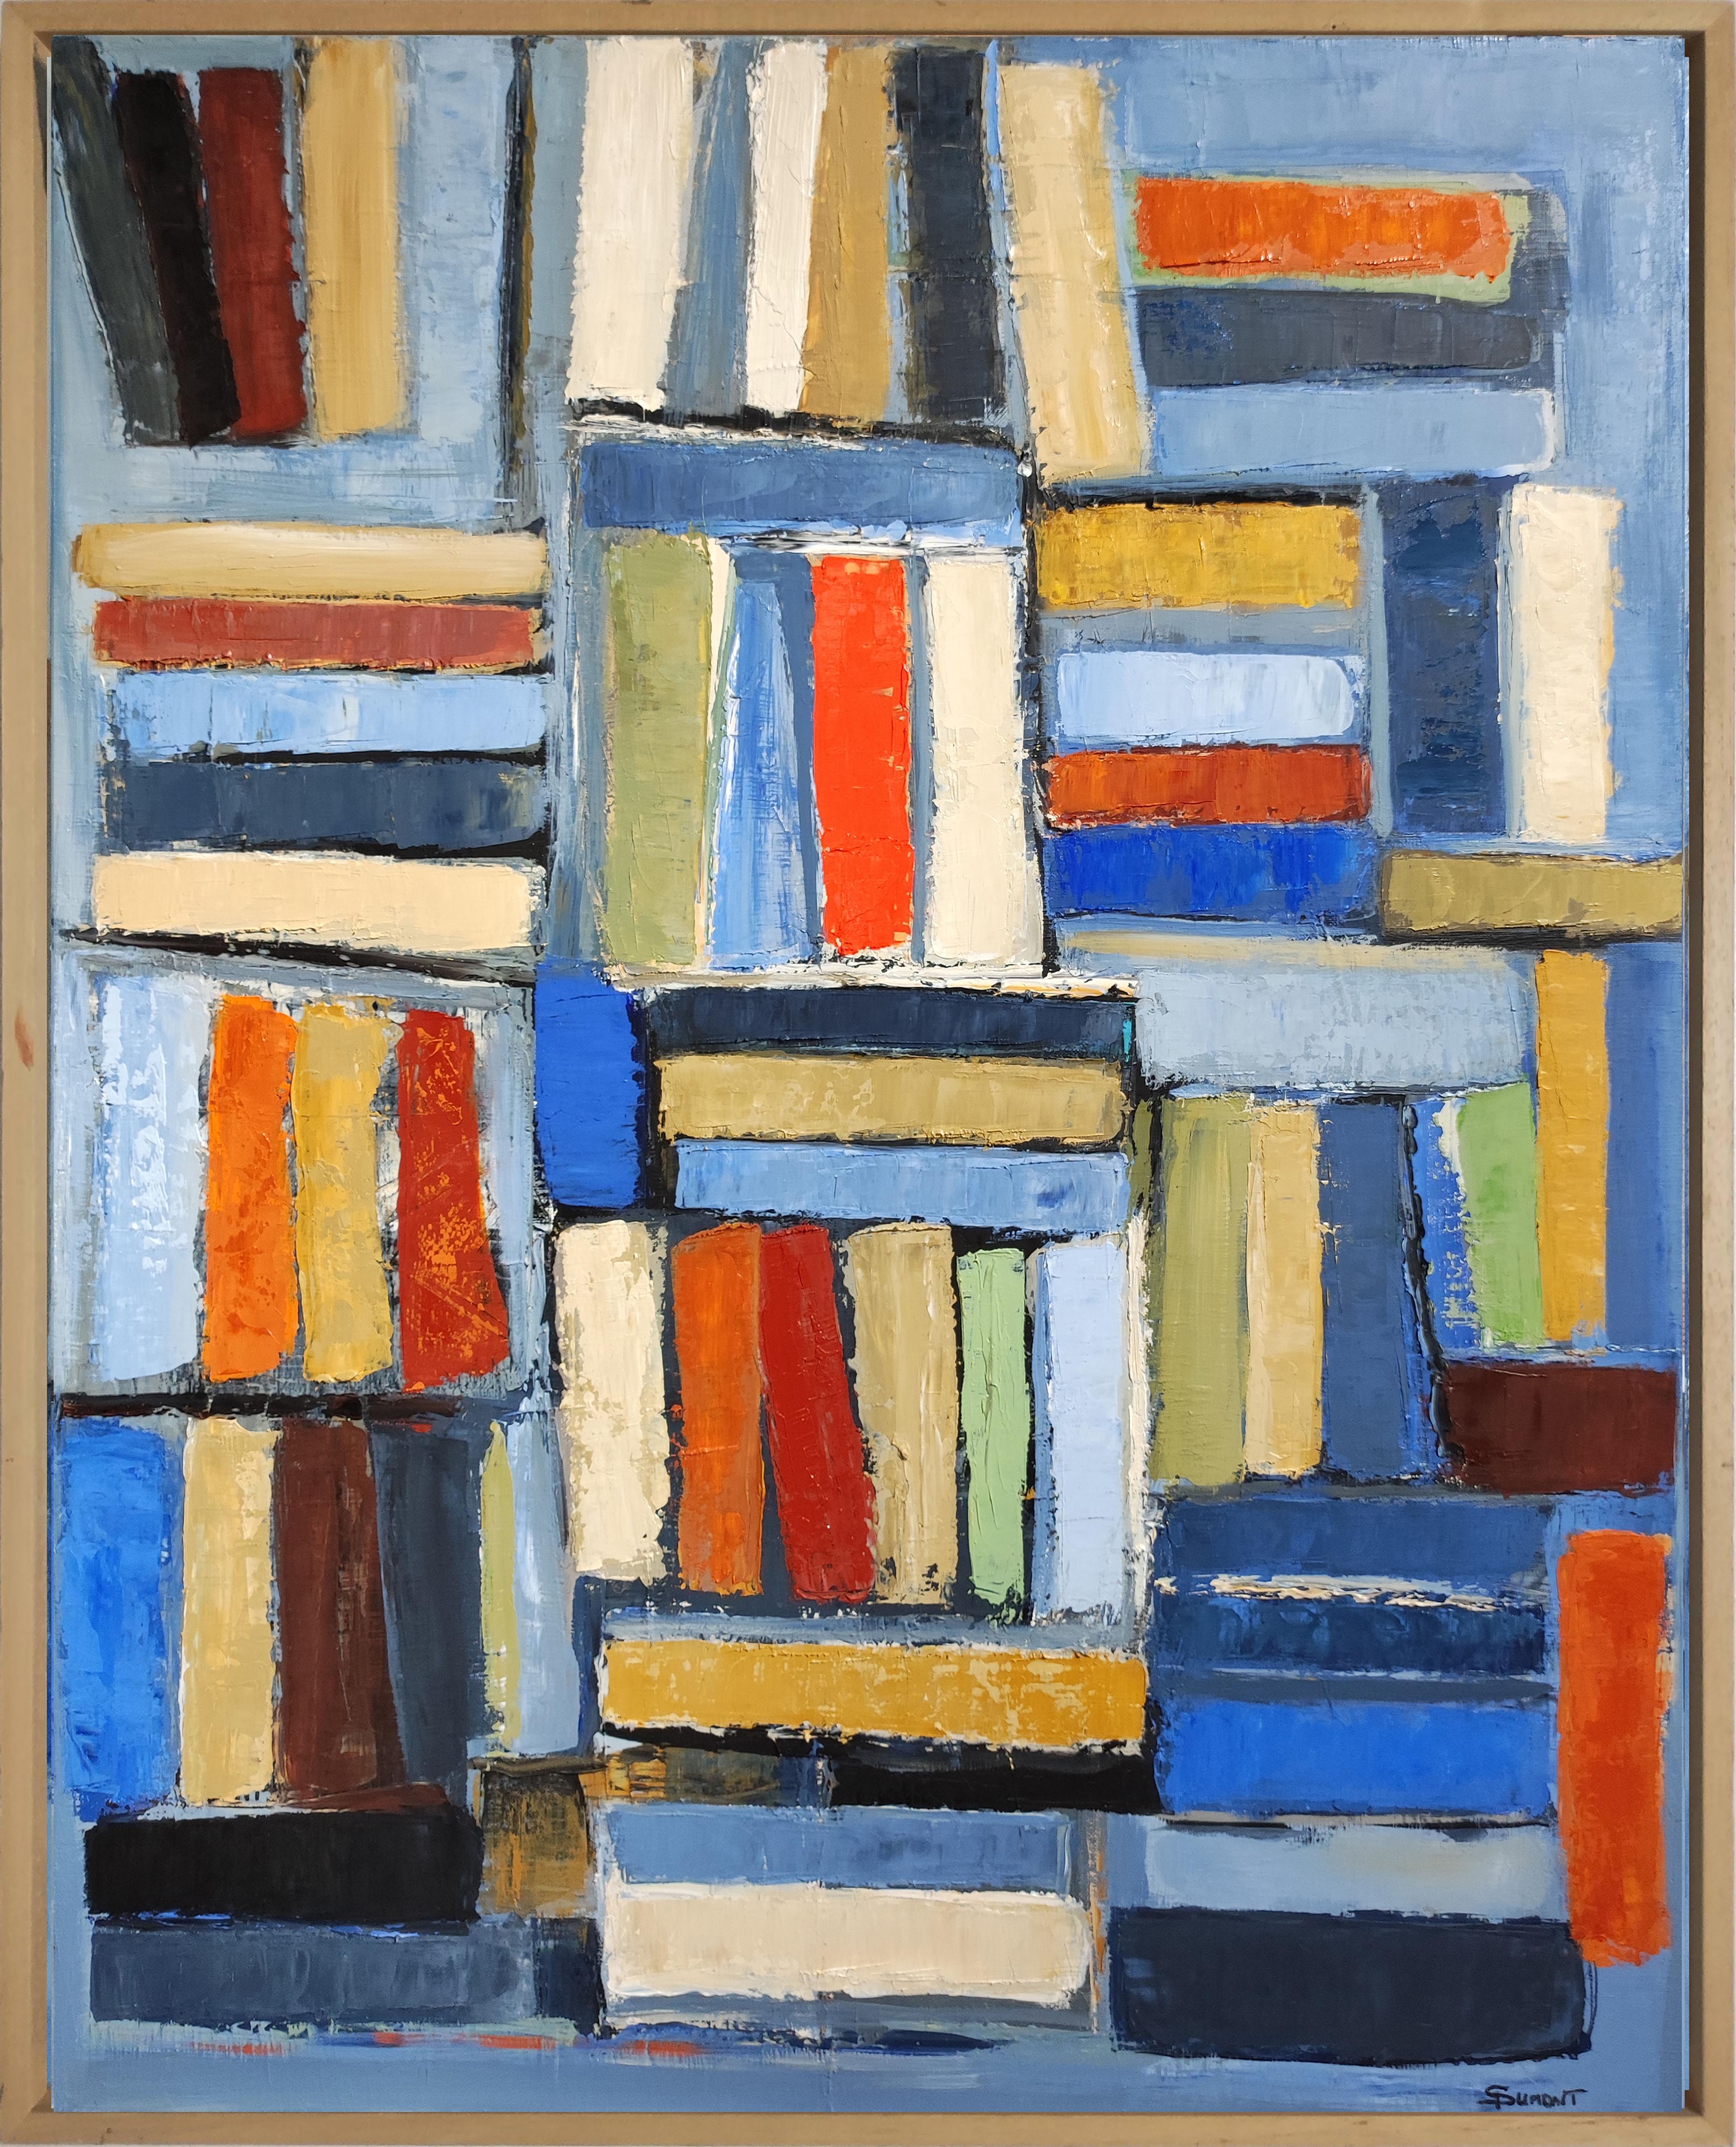 library 2, colors books in library, abstract, expressionism, oil on canvas - Painting by SOPHIE DUMONT